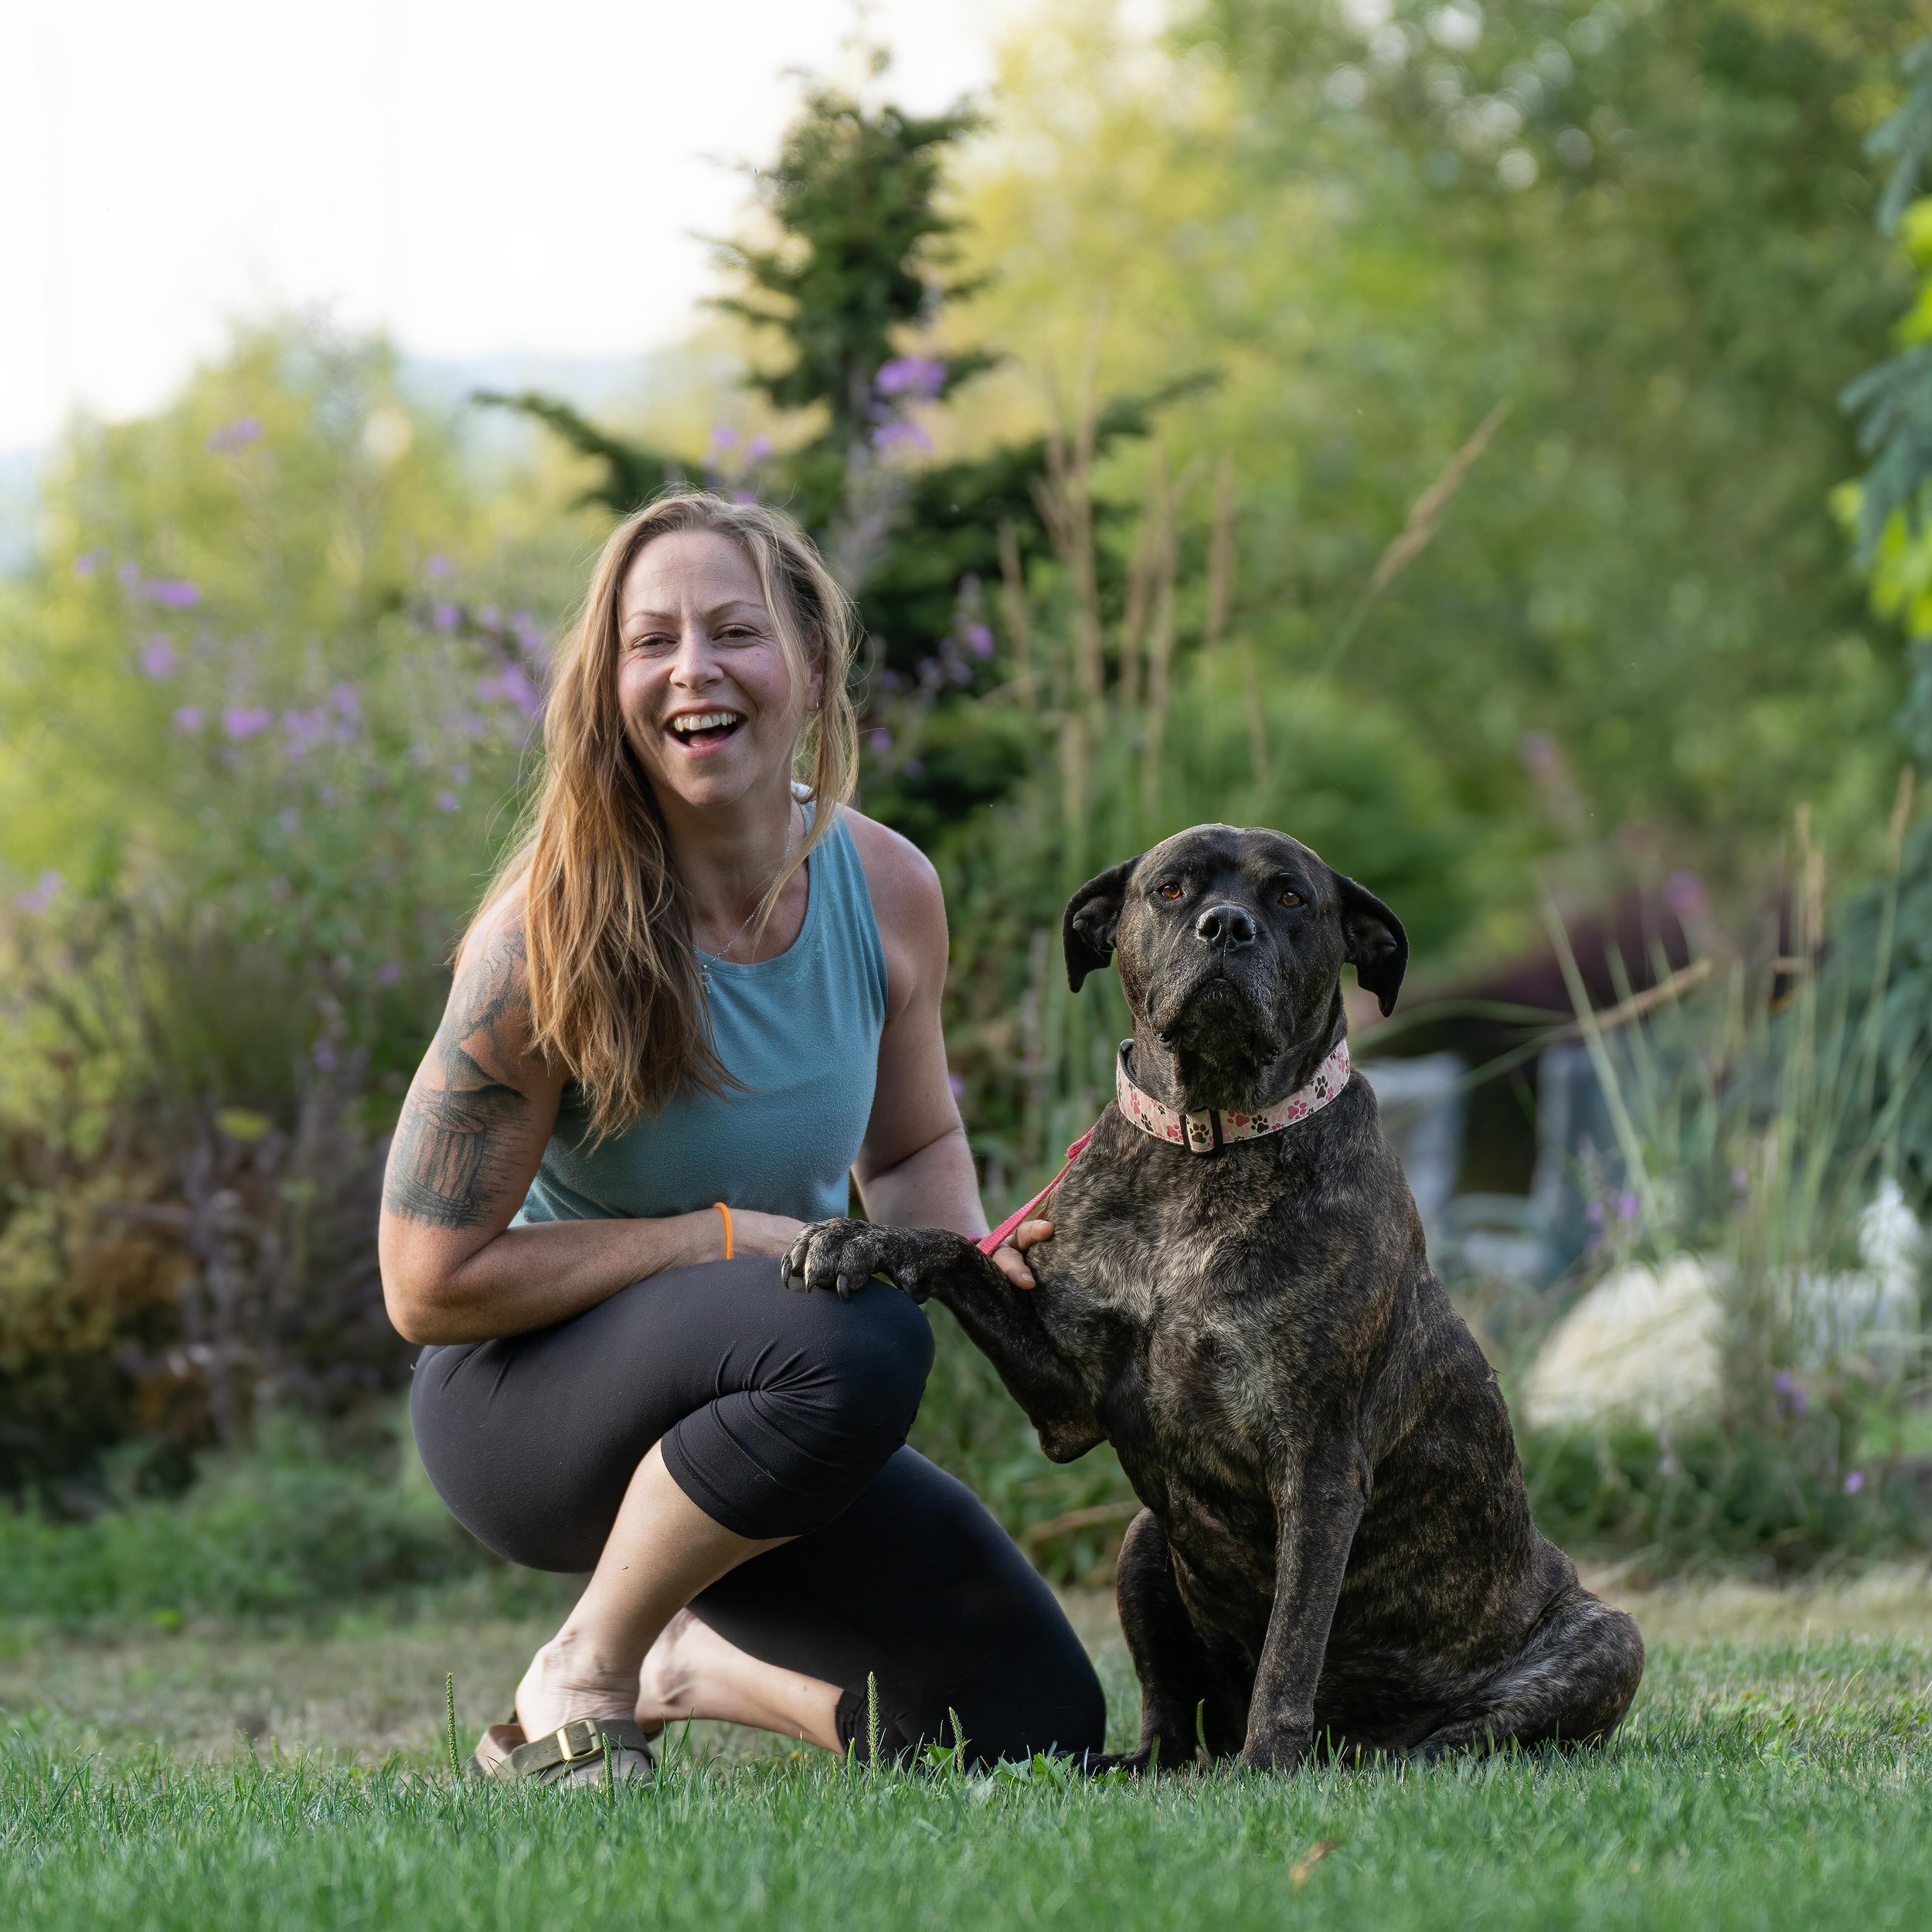 Today marks the end of an era at Doghaven as we say goodbye to Rachele, who has been an invaluable part of our team for nearly two decades. 🐾 Her dedication and love for our furry friends has left a significant mark on all of us-especially the dogs-